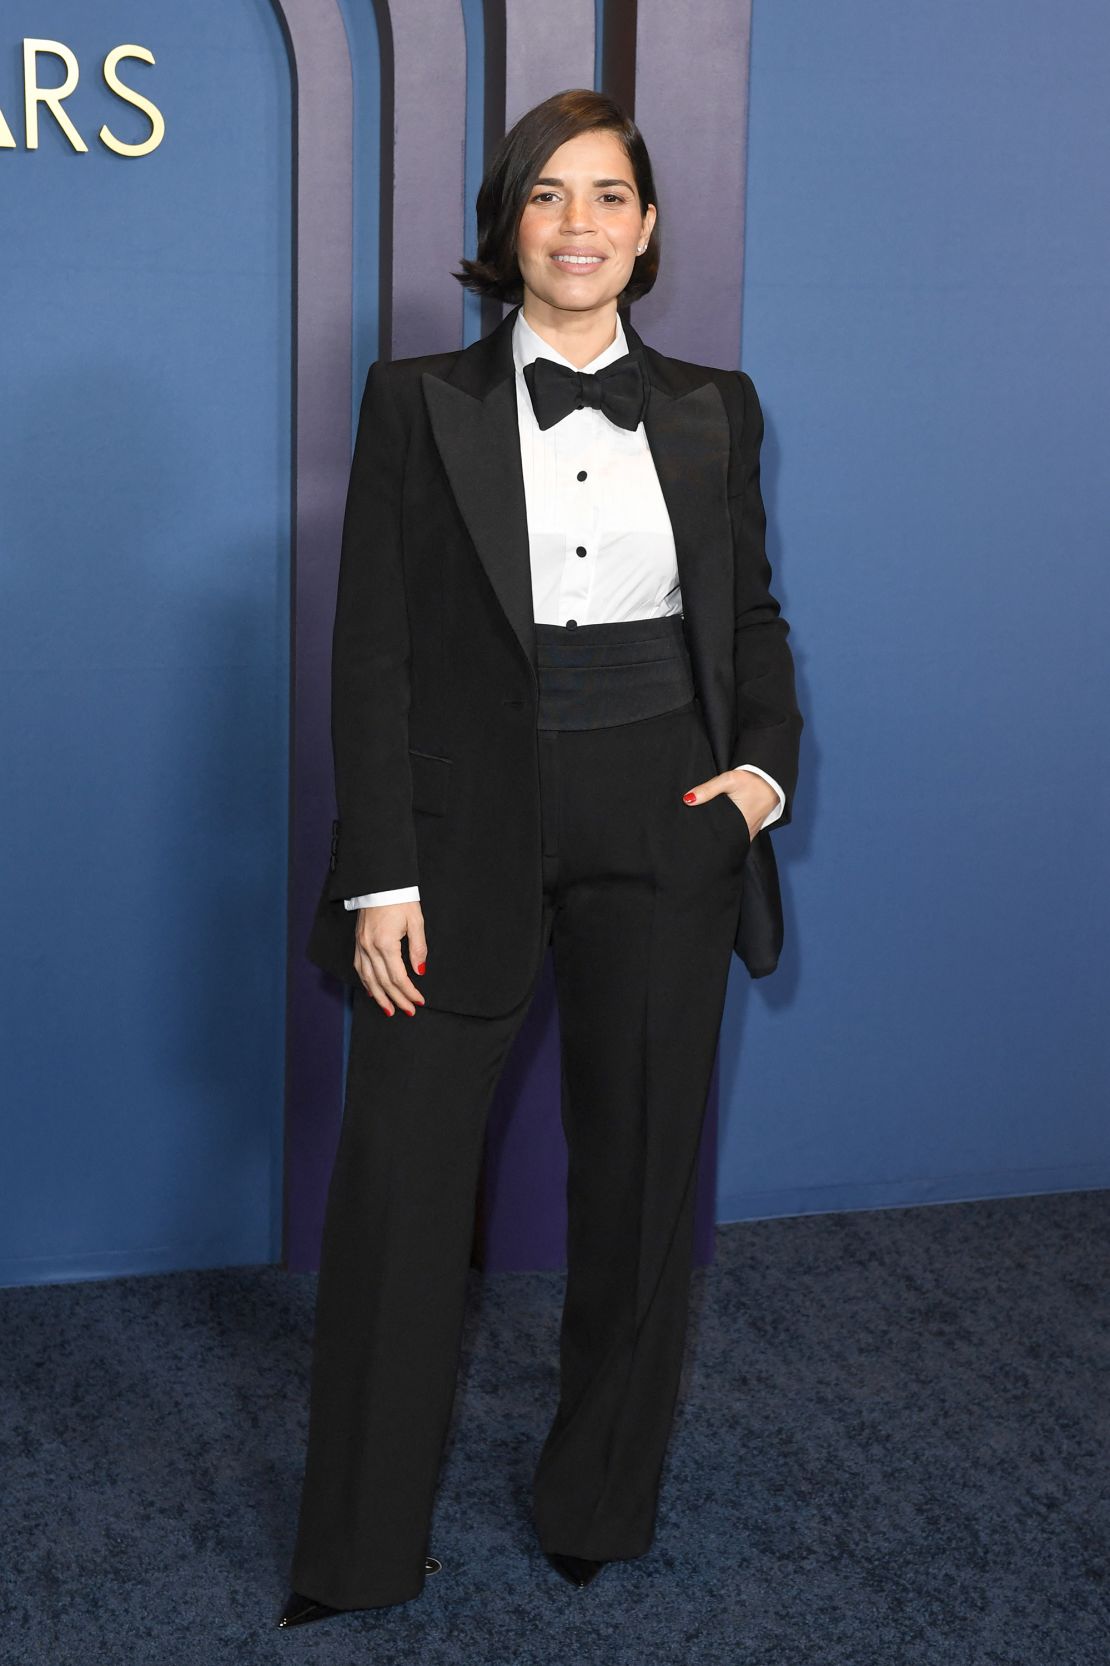 America Ferrera in her custom Moschino tuxedo. The Saint Laurent museum cite the look as being a "stylish garment not a fashionable garment."